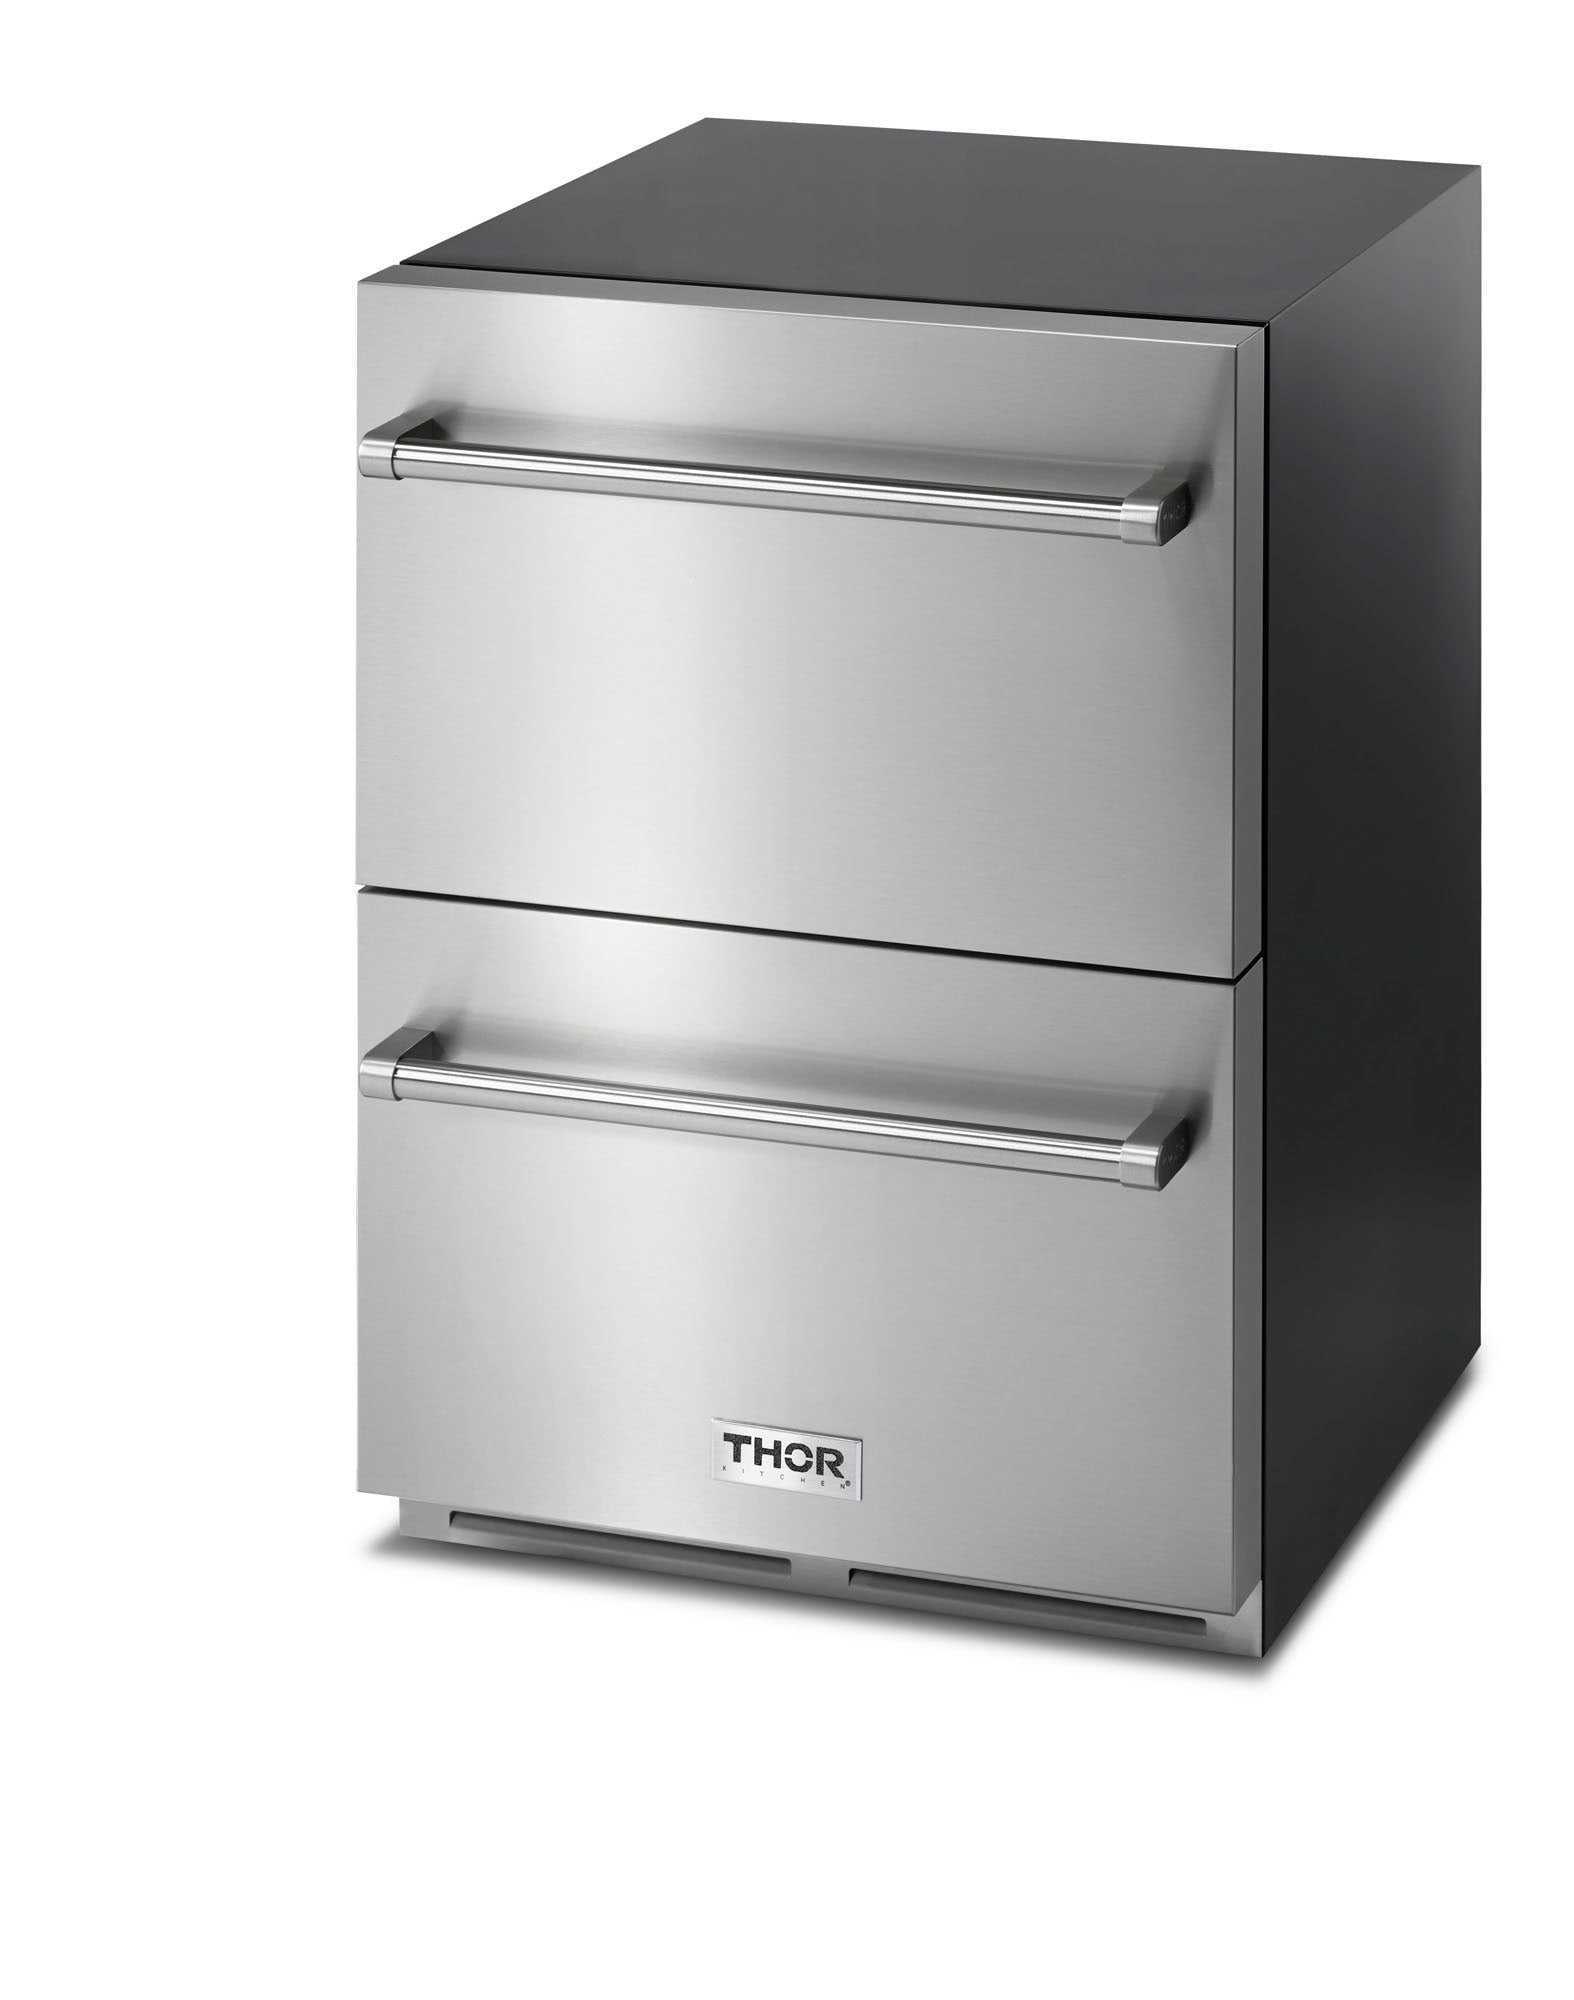 What's the Standard Refrigerator Size? - THOR Kitchen